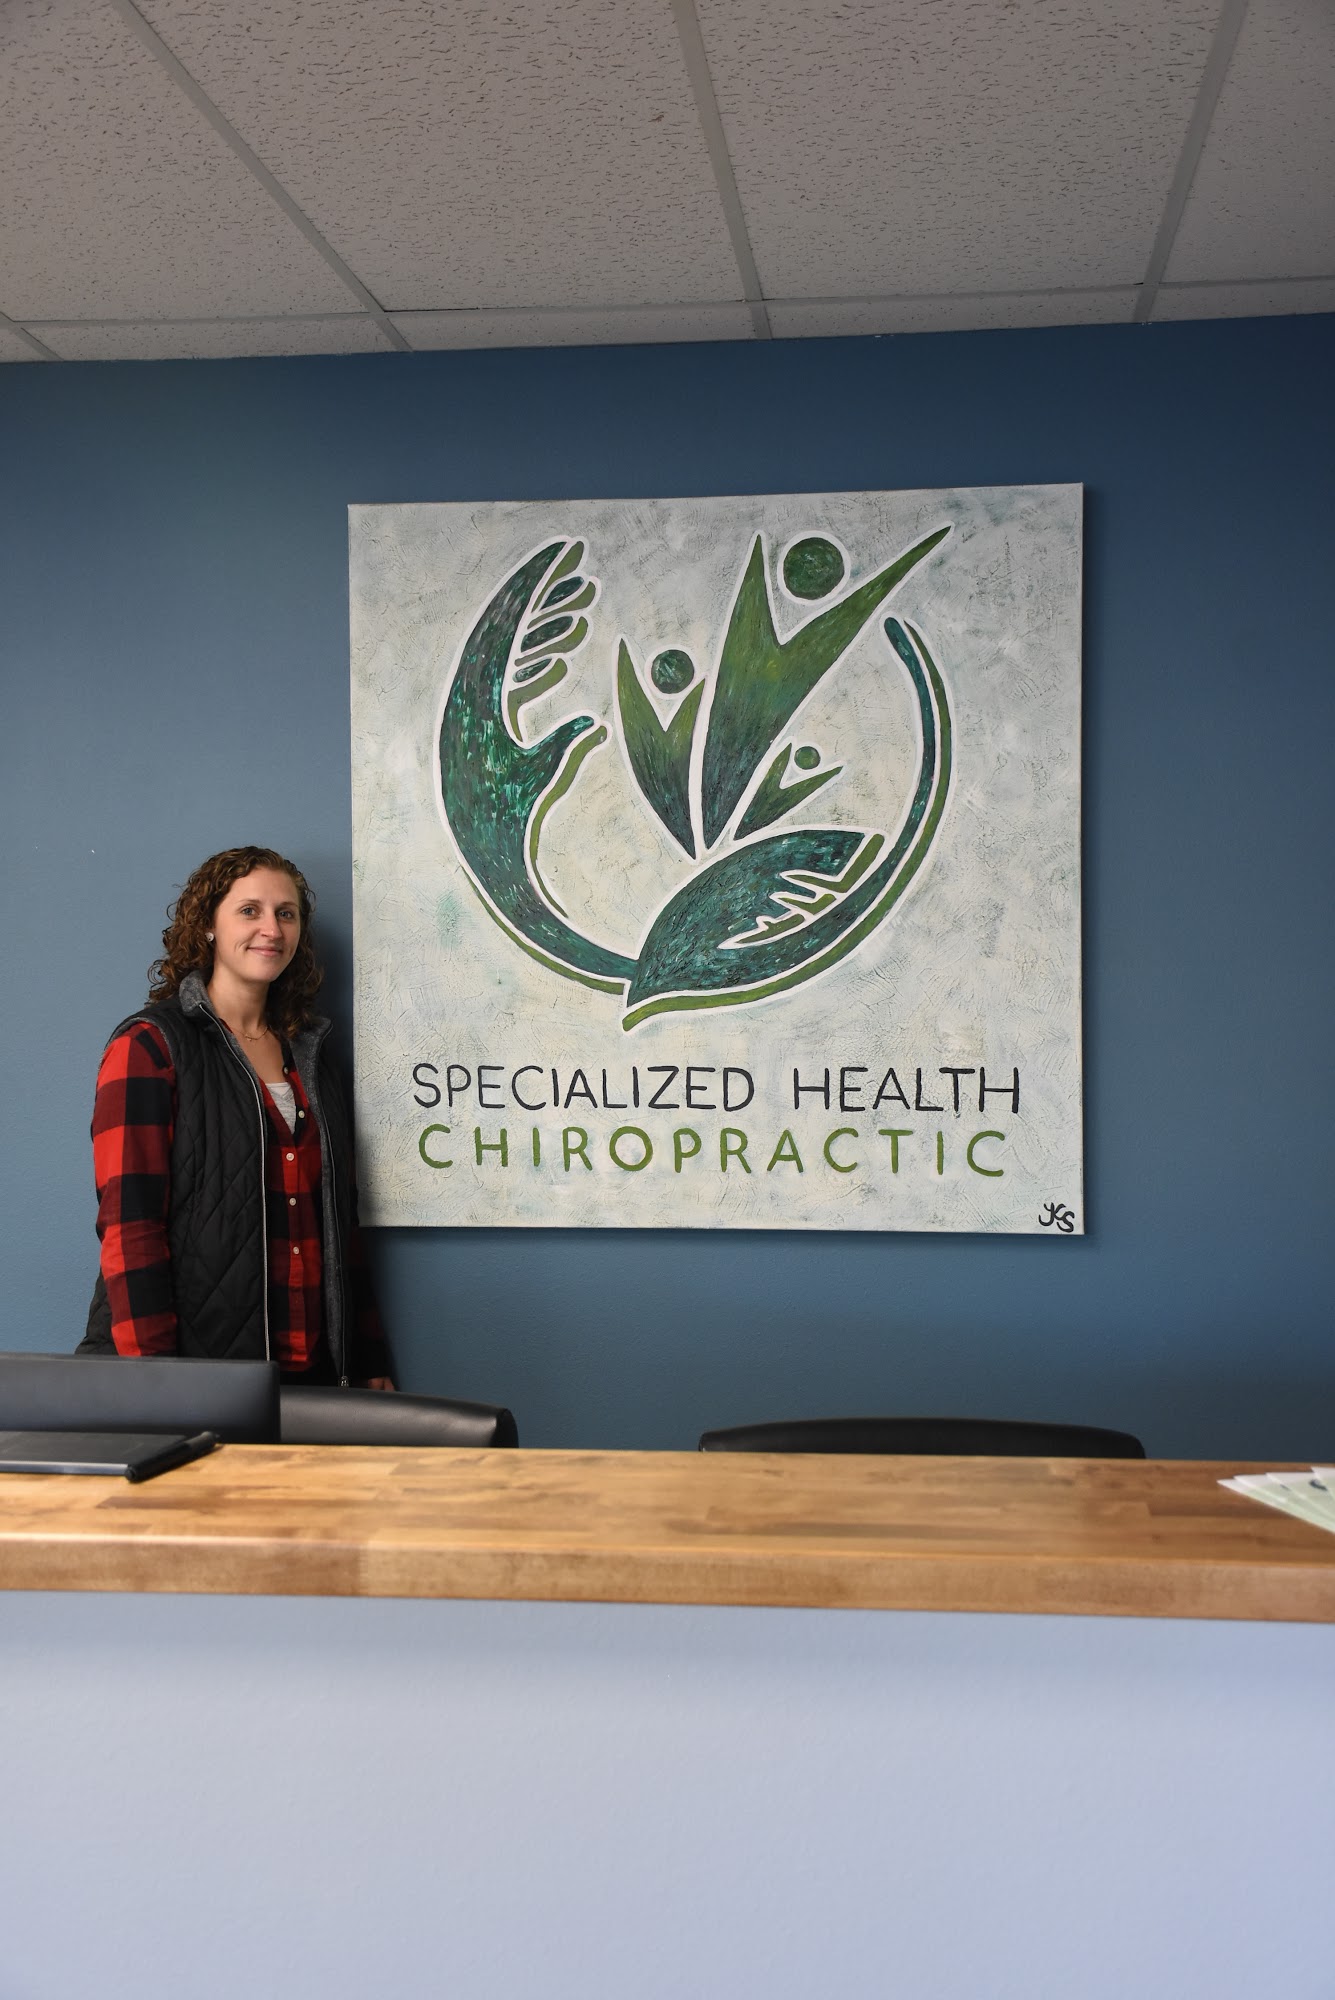 Specialized Health Chiropractic 707 Main St, Adel Iowa 50003